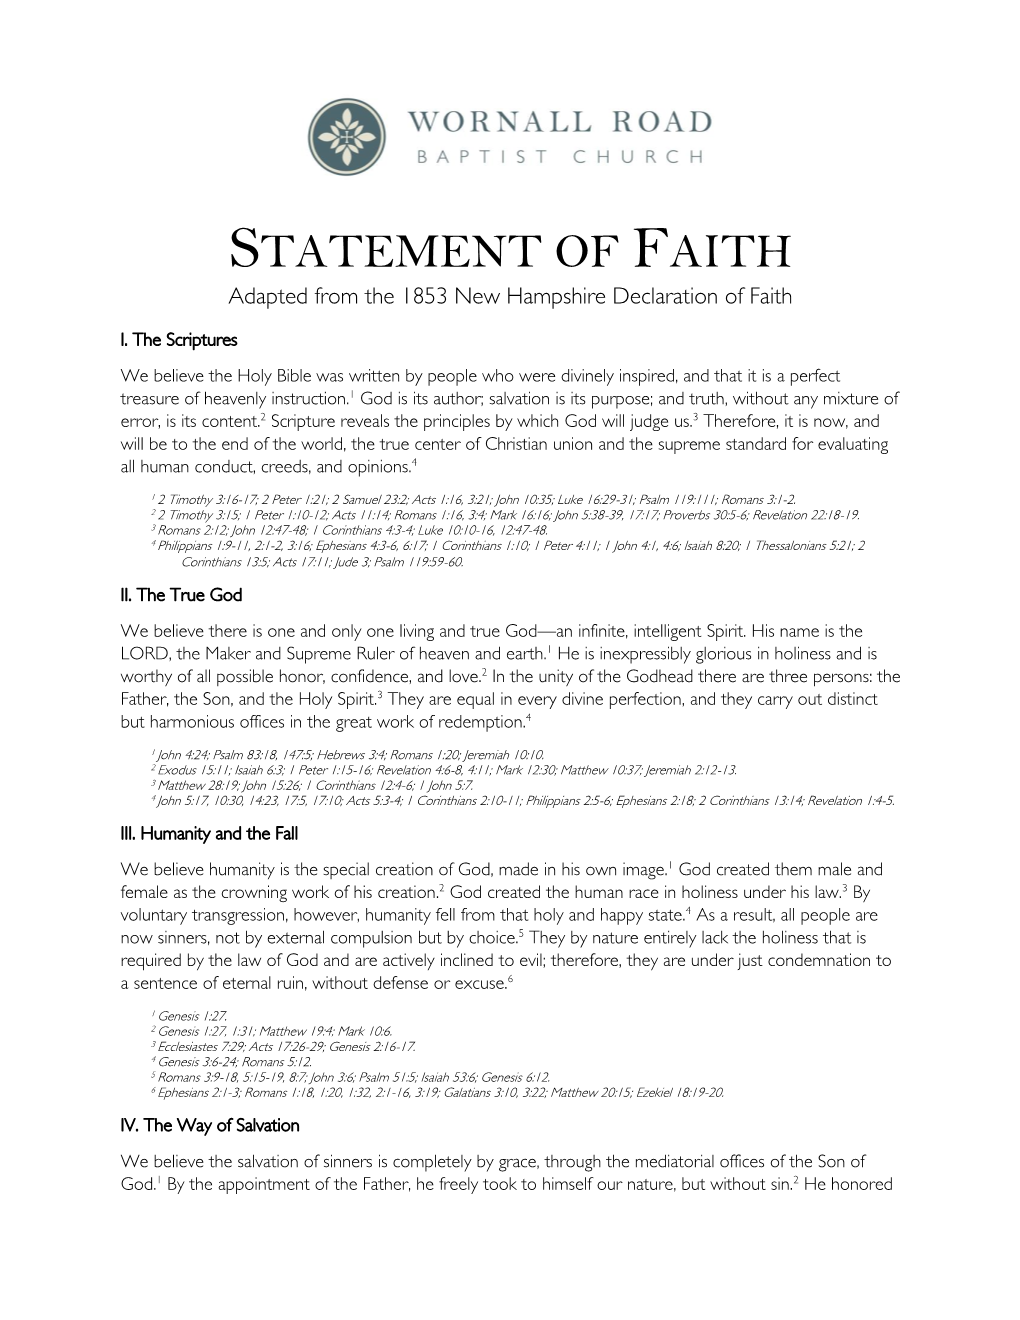 STATEMENT of FAITH Adapted from the 1853 New Hampshire Declaration of Faith